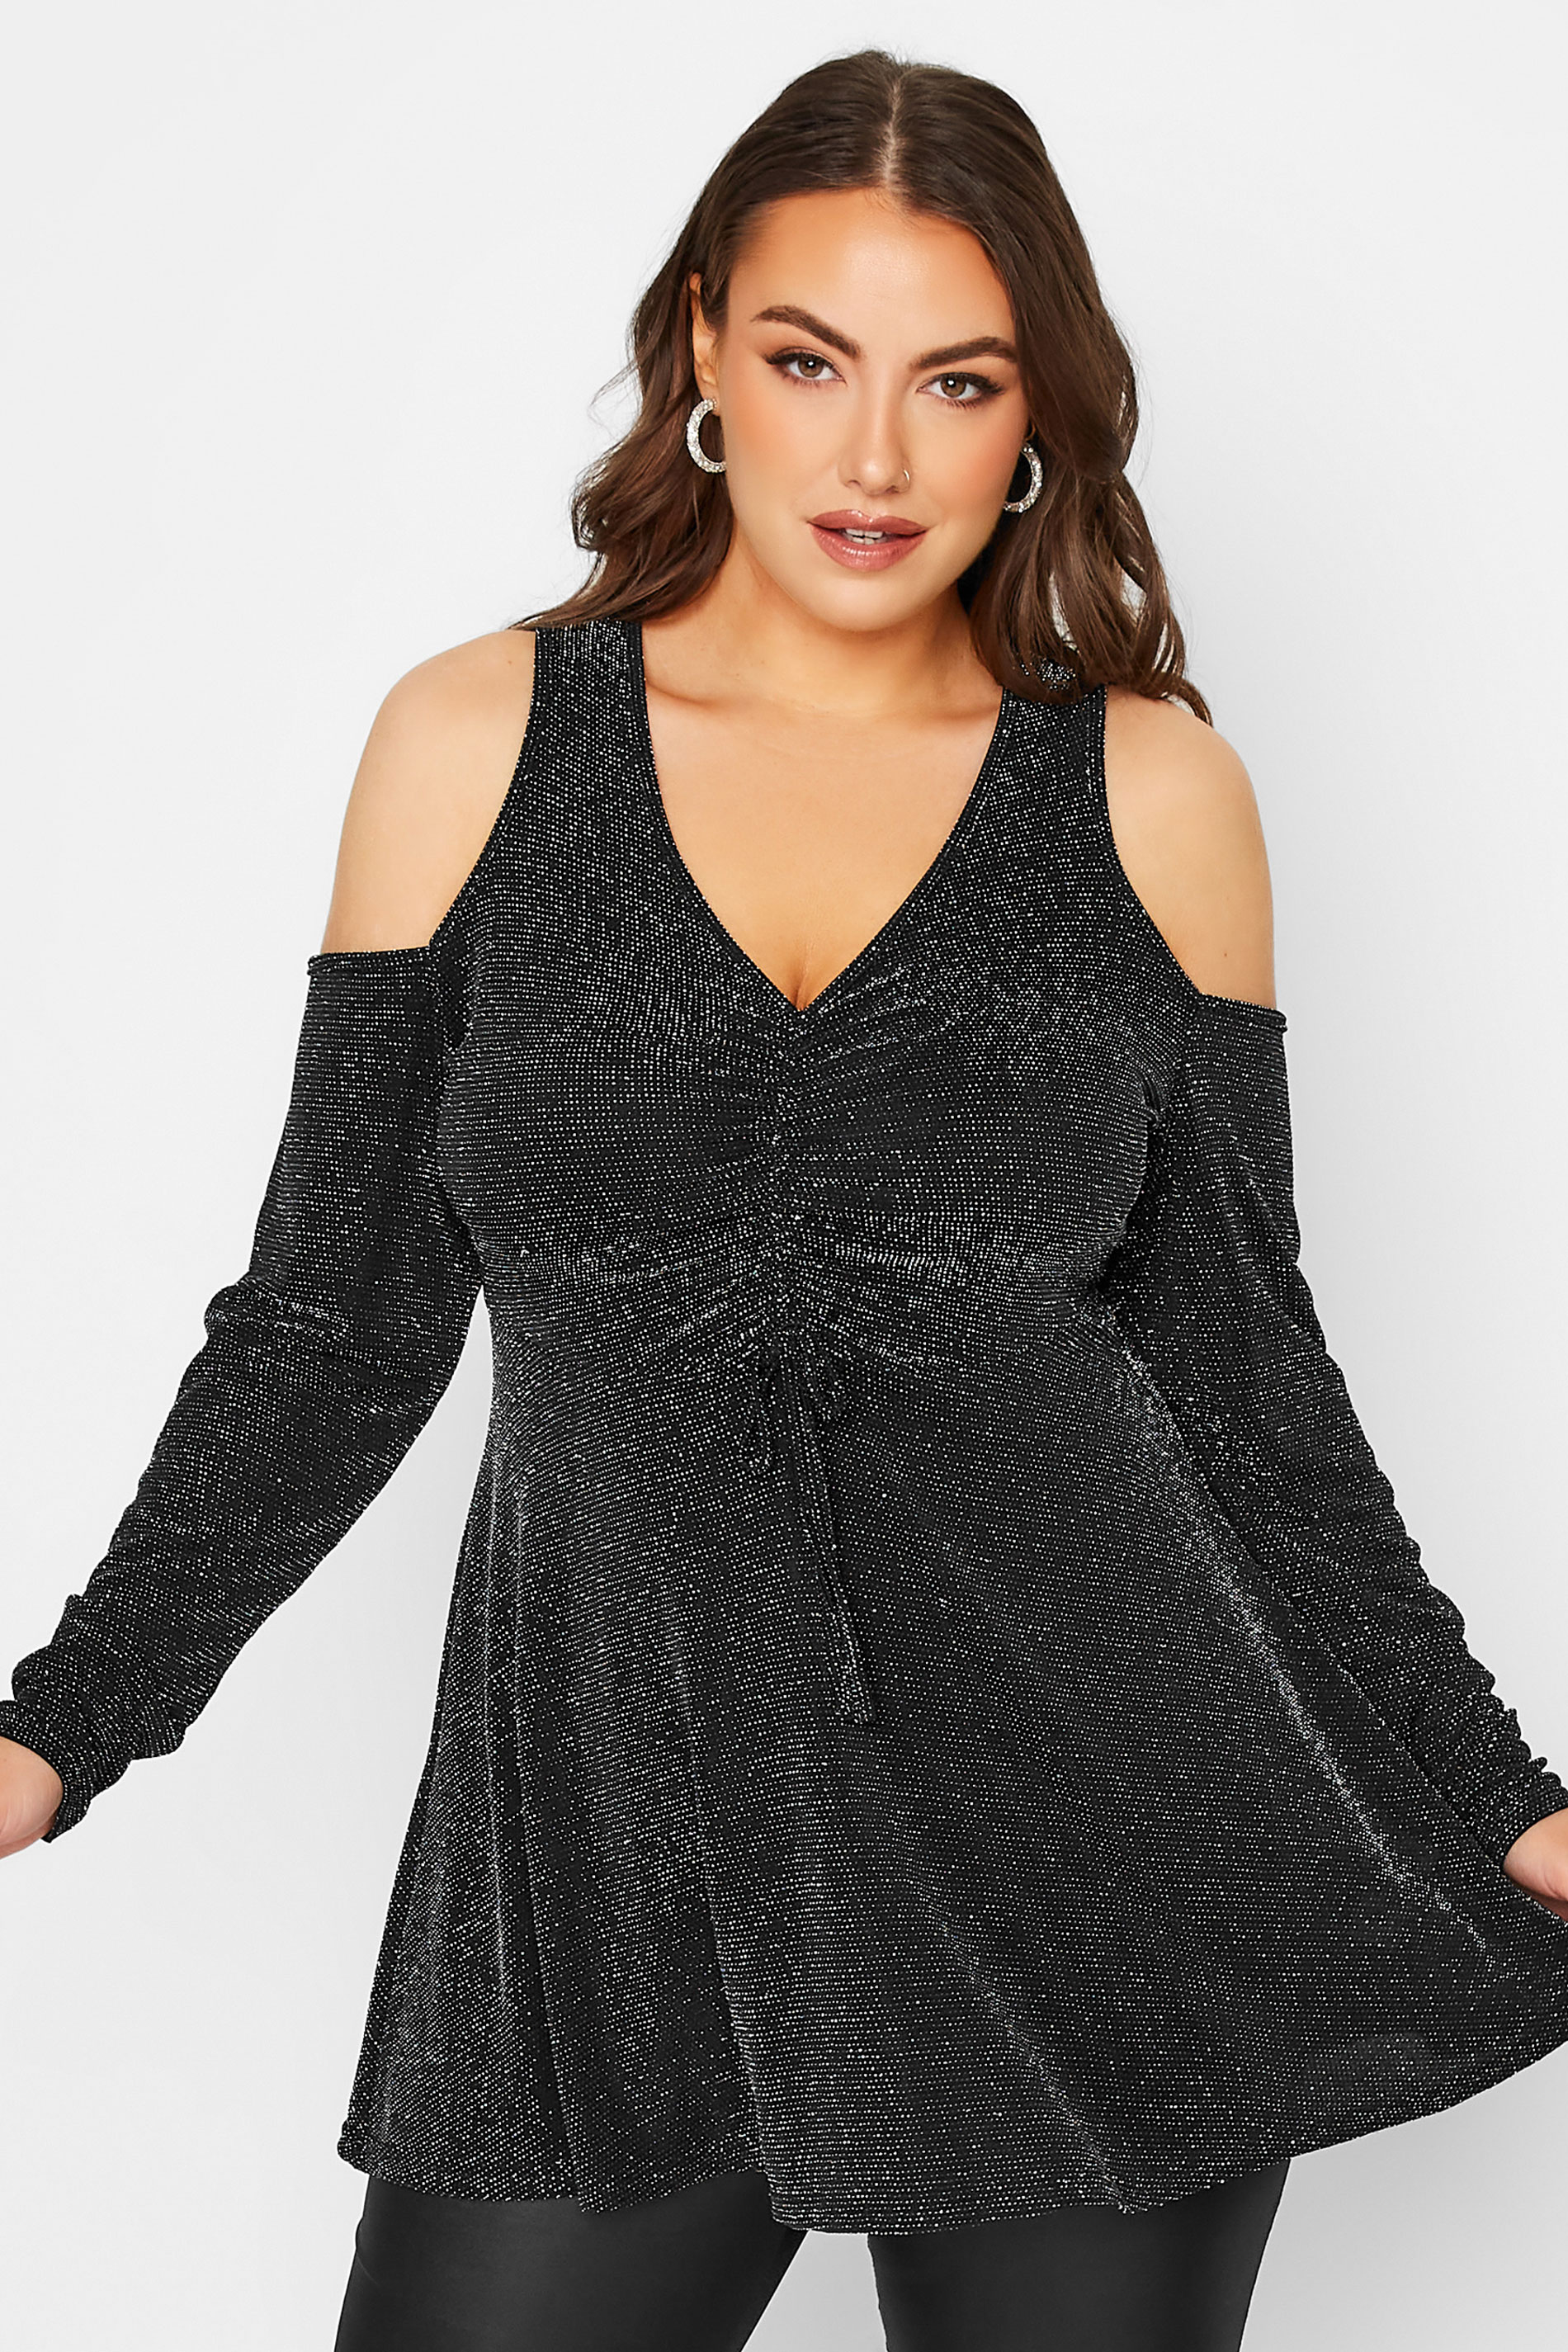 LIMITED COLLECTION Plus Size Black & Silver Glitter Cold Shoulder Top | Yours Clothing 1